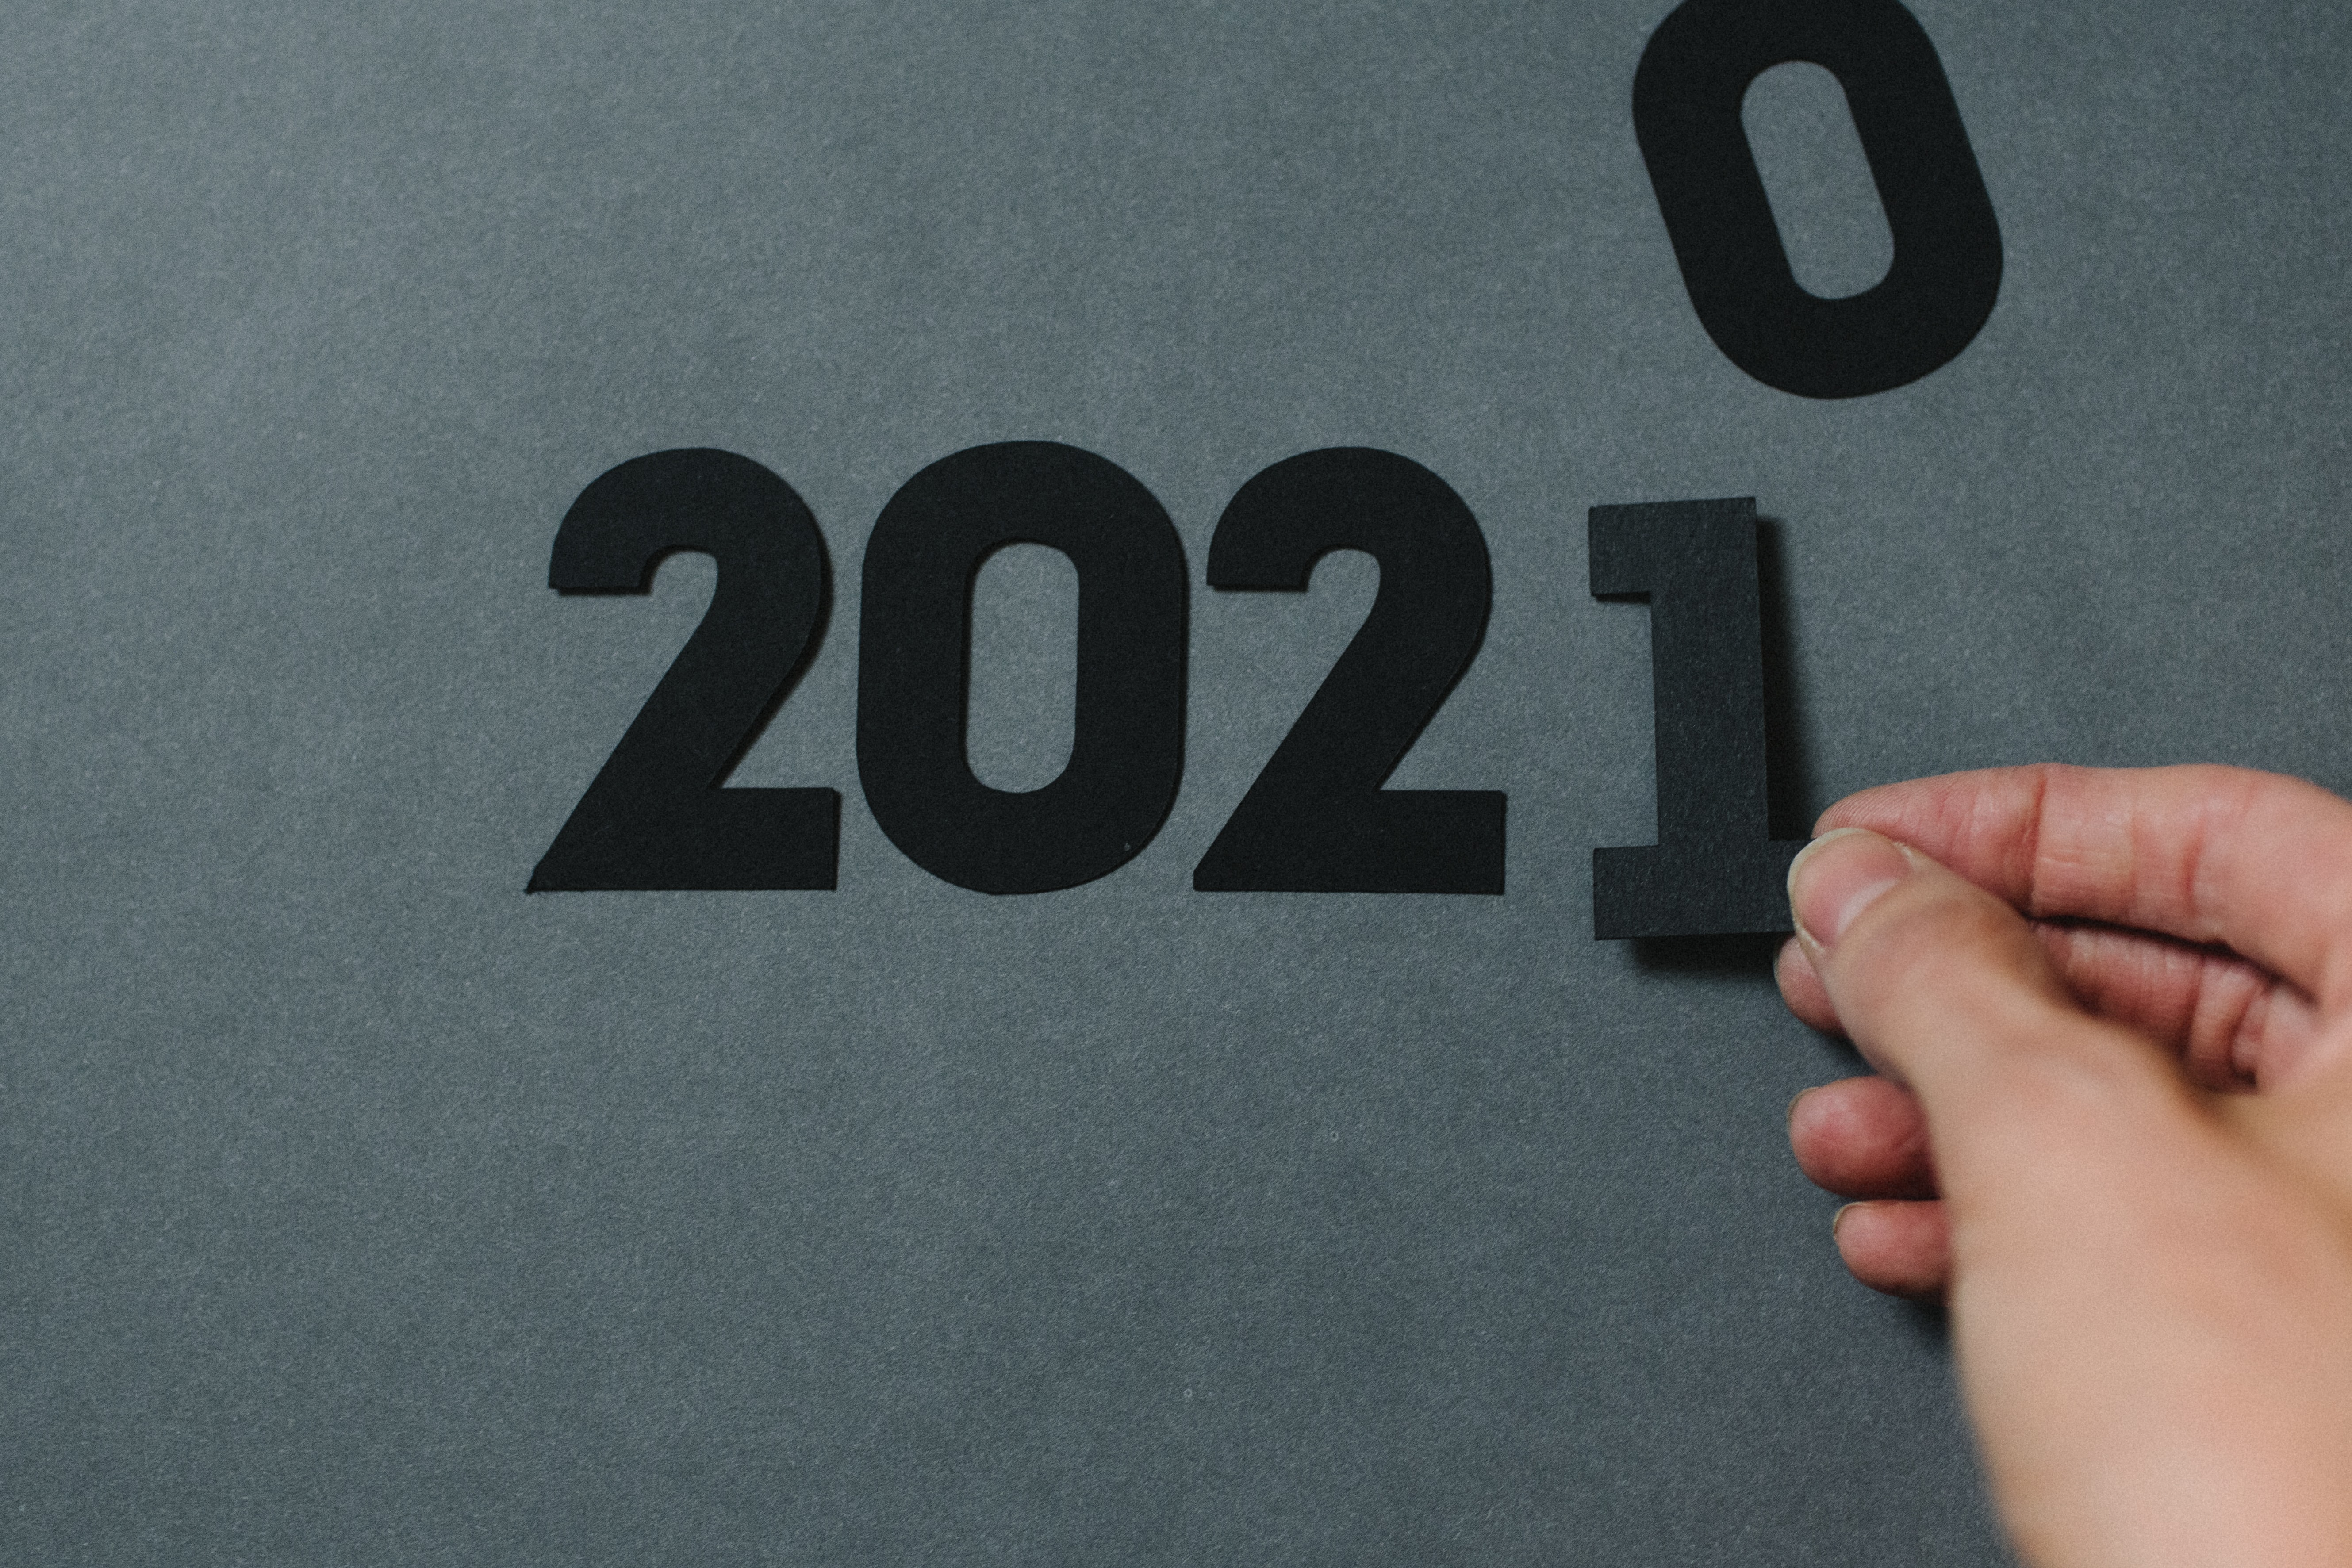 Here's how to make 2021 your best growth year ever!